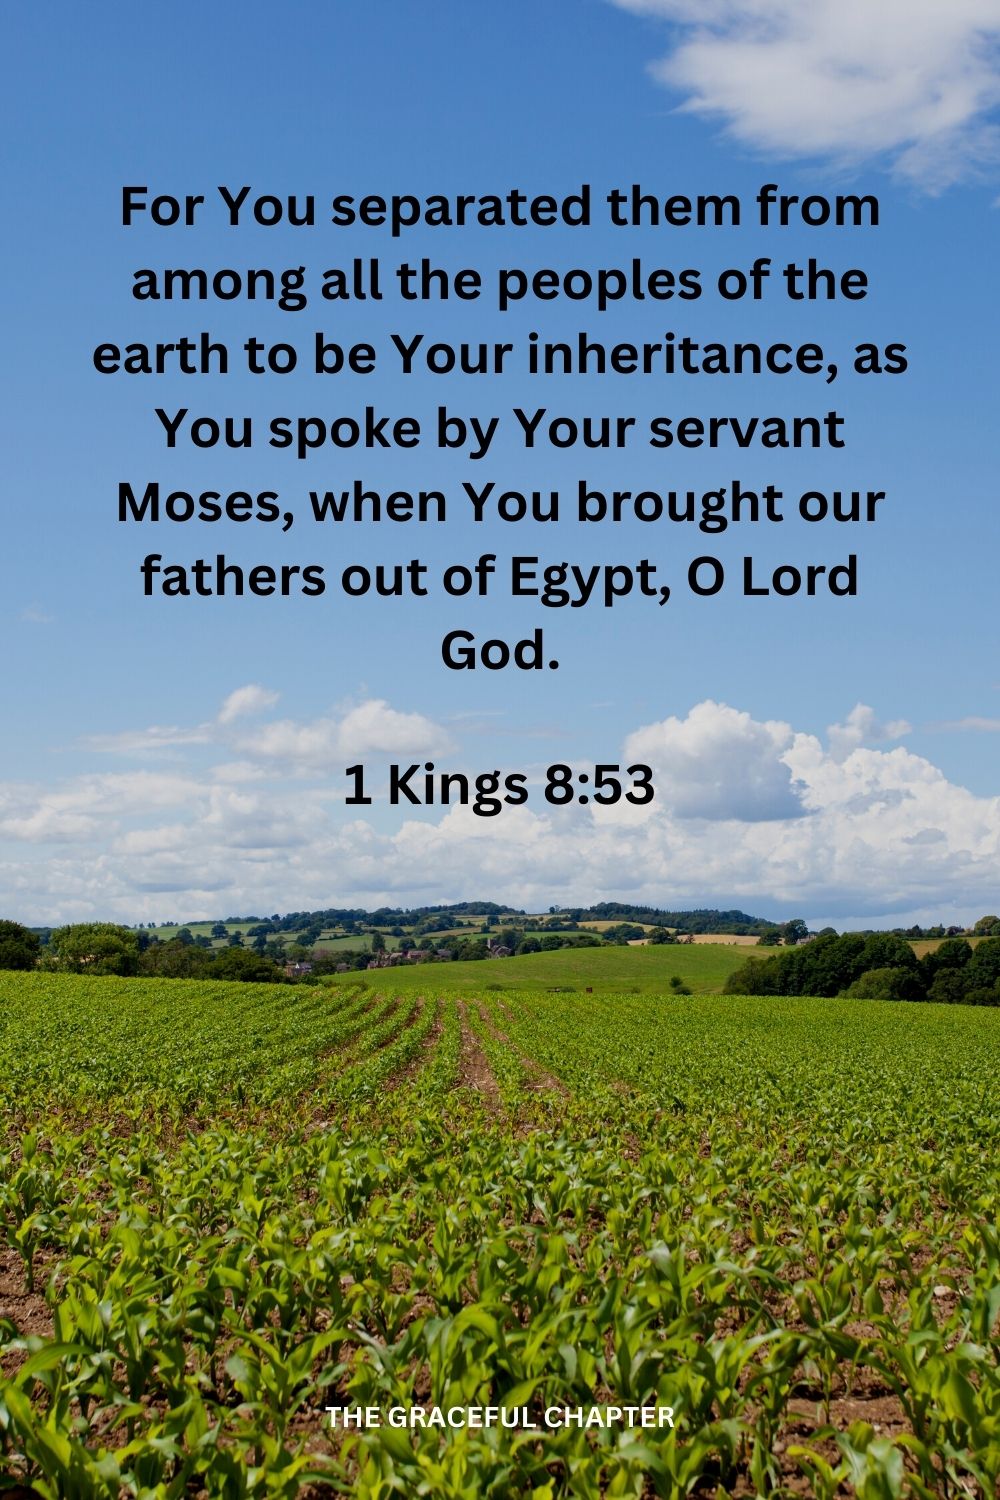 For You separated them from among all the peoples of the earth to be Your inheritance, as You spoke by Your servant Moses, when You brought our fathers out of Egypt, O Lord God.1 Kings 8:53